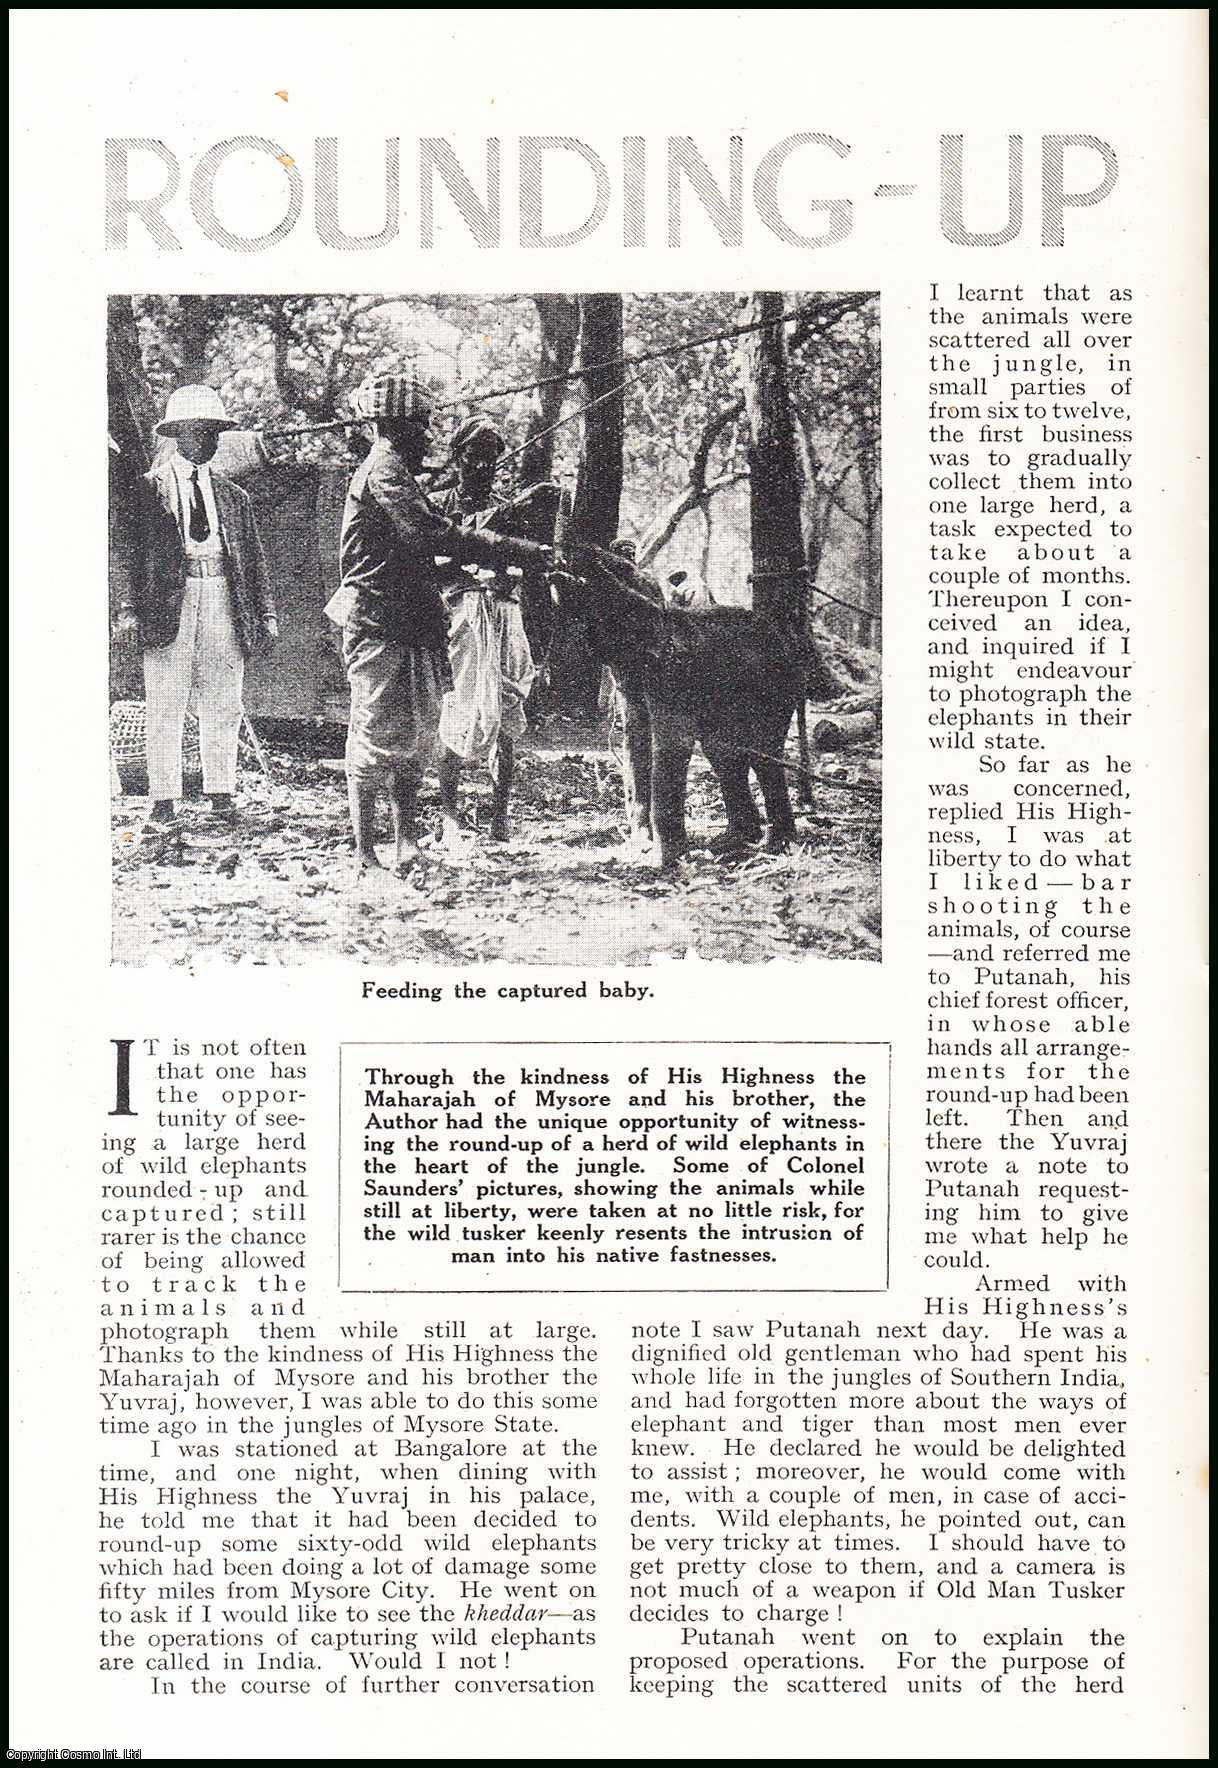 Lieut.-Colonel P.C. Saunders, O.B.E. - Rounding-Up Wild Elephants in the Jungles of Mysore State. An uncommon original article from the Wide World Magazine, 1937.